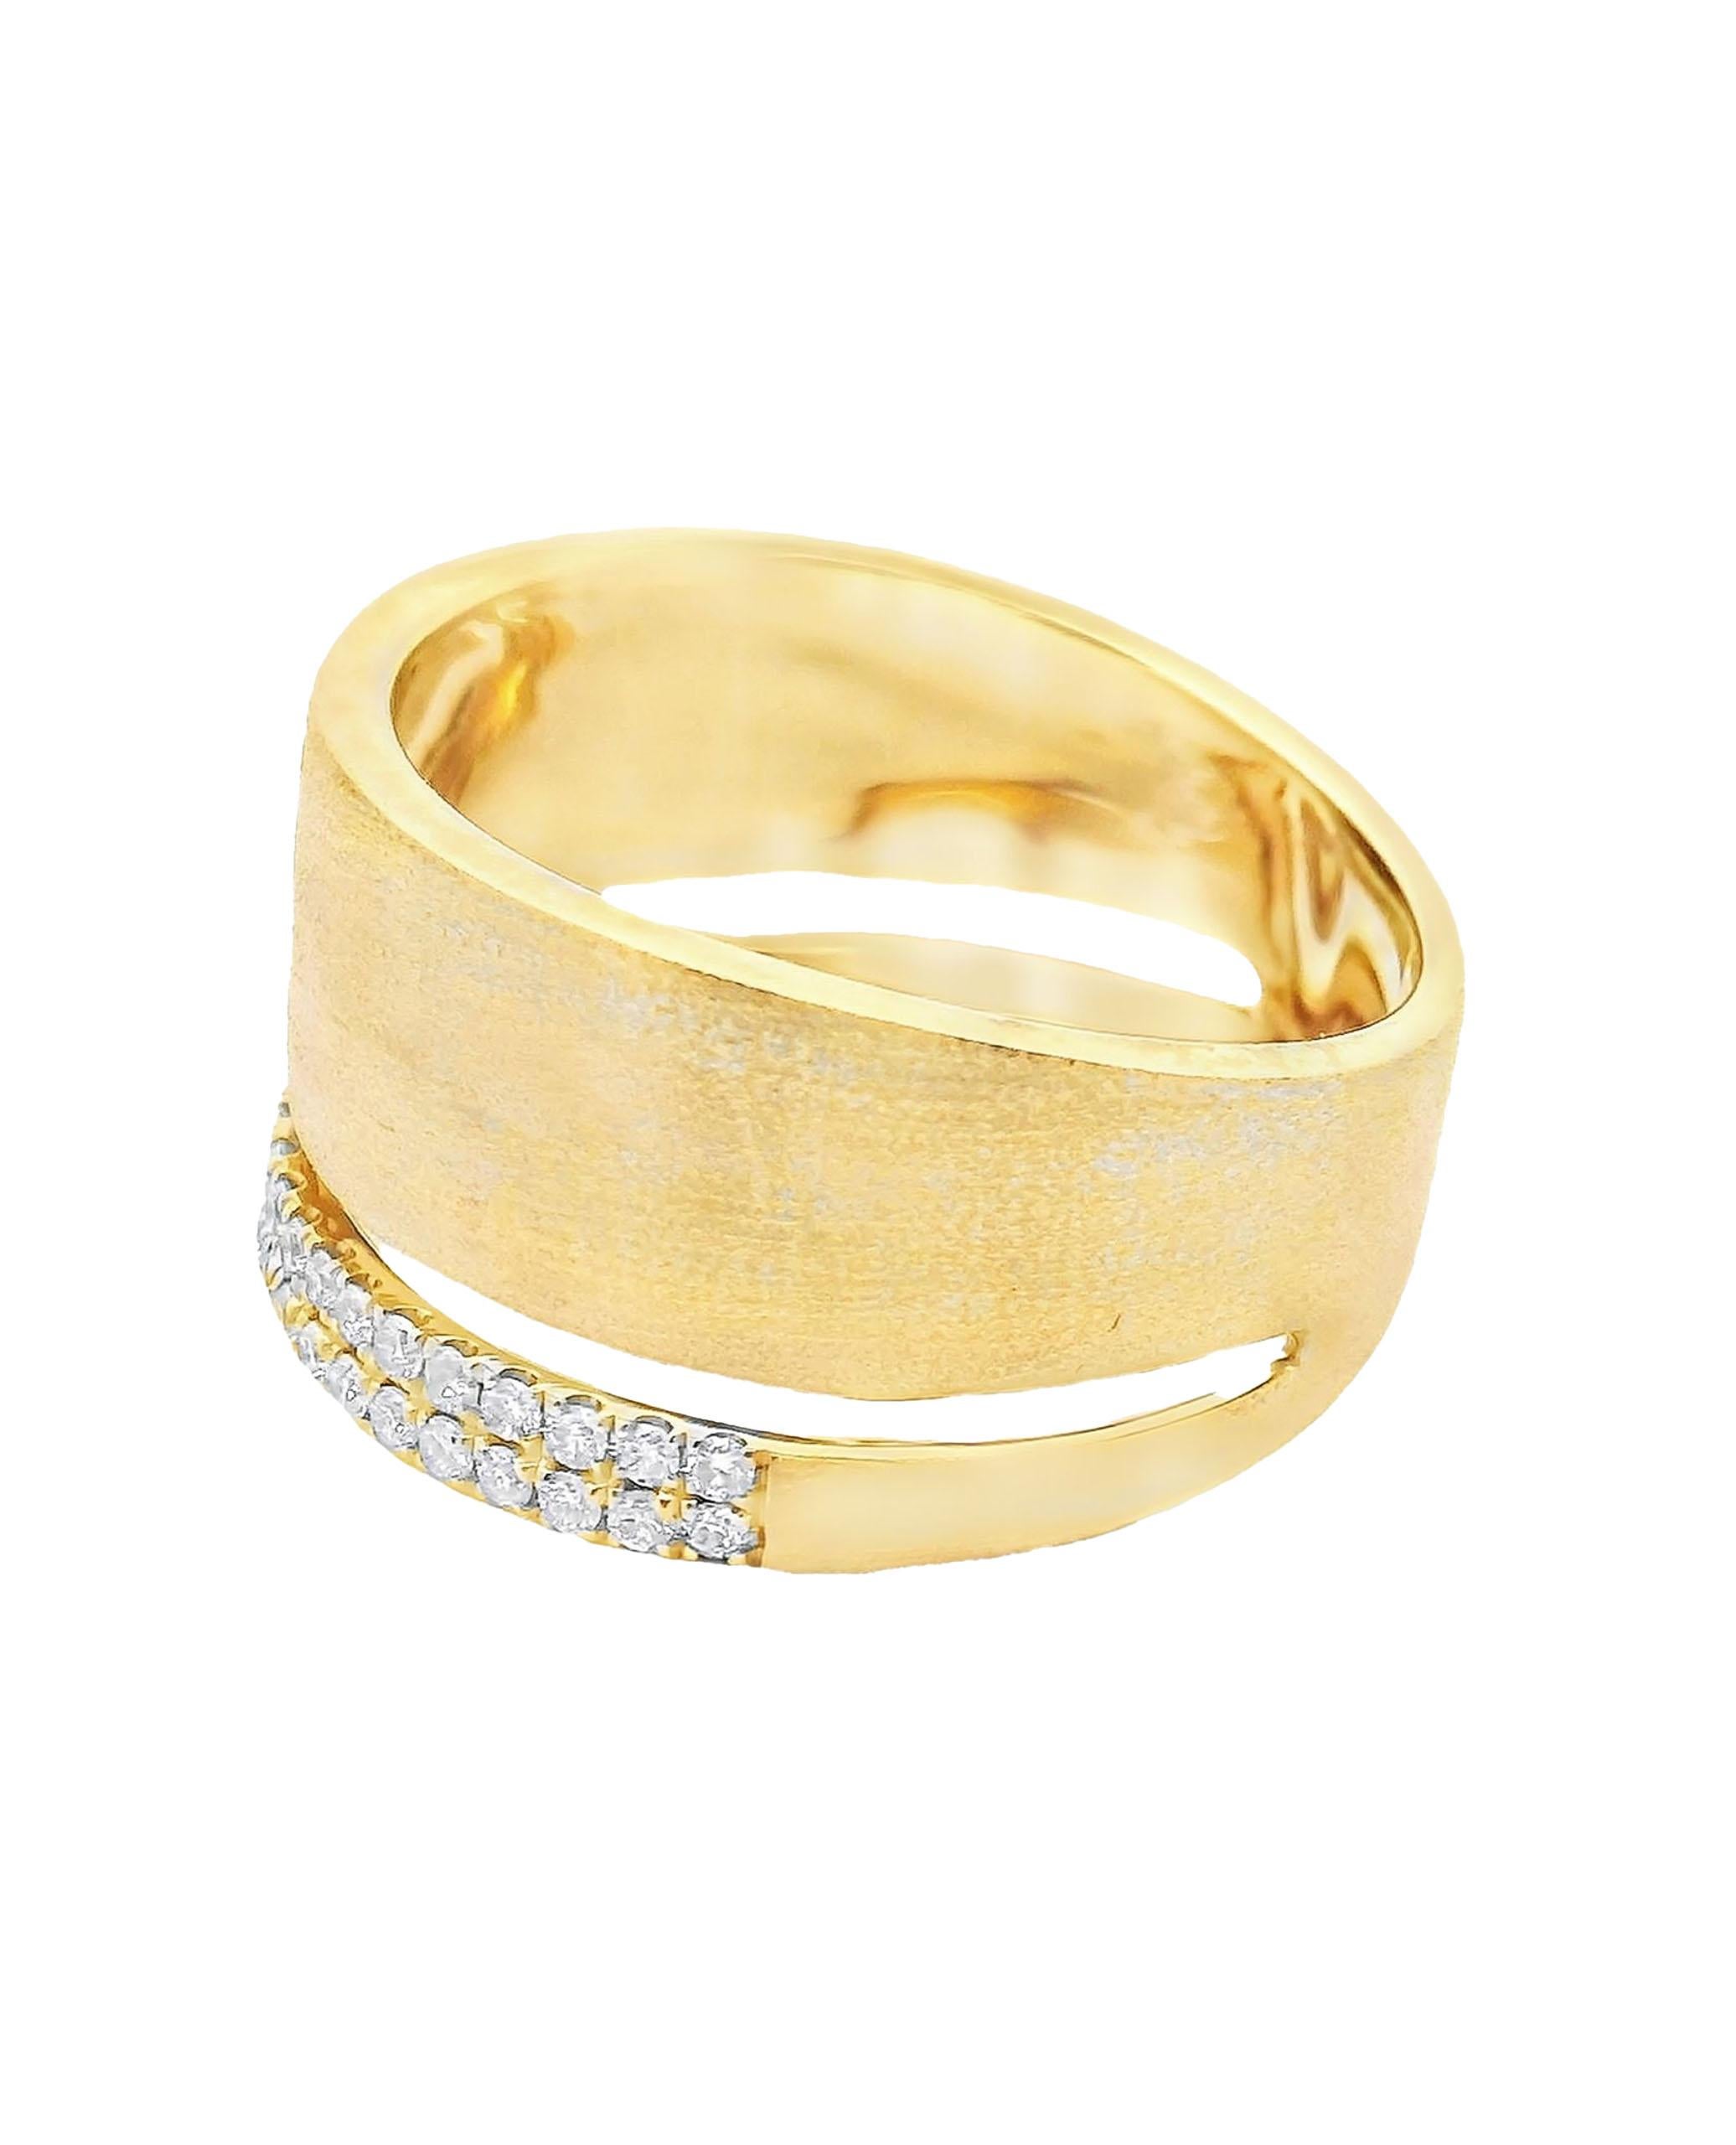 18K yellow gold wide ring with matte finish and round brilliant-cut diamonds weighing 0.27 carats total. 

- Finger Size 6.75
- Diamonds are H/I color, SI clarity.